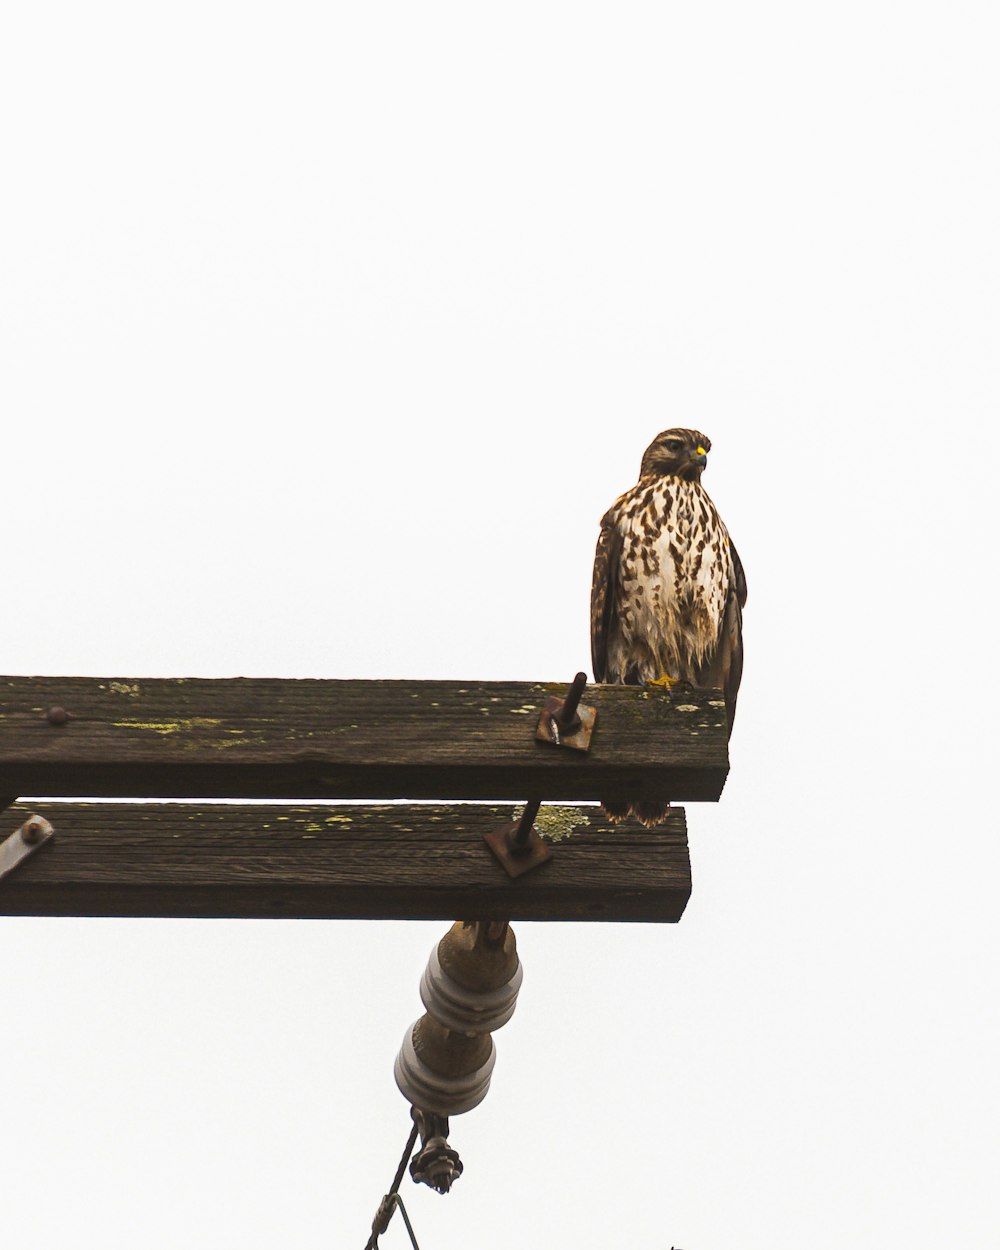 a bird is perched on a wooden bench